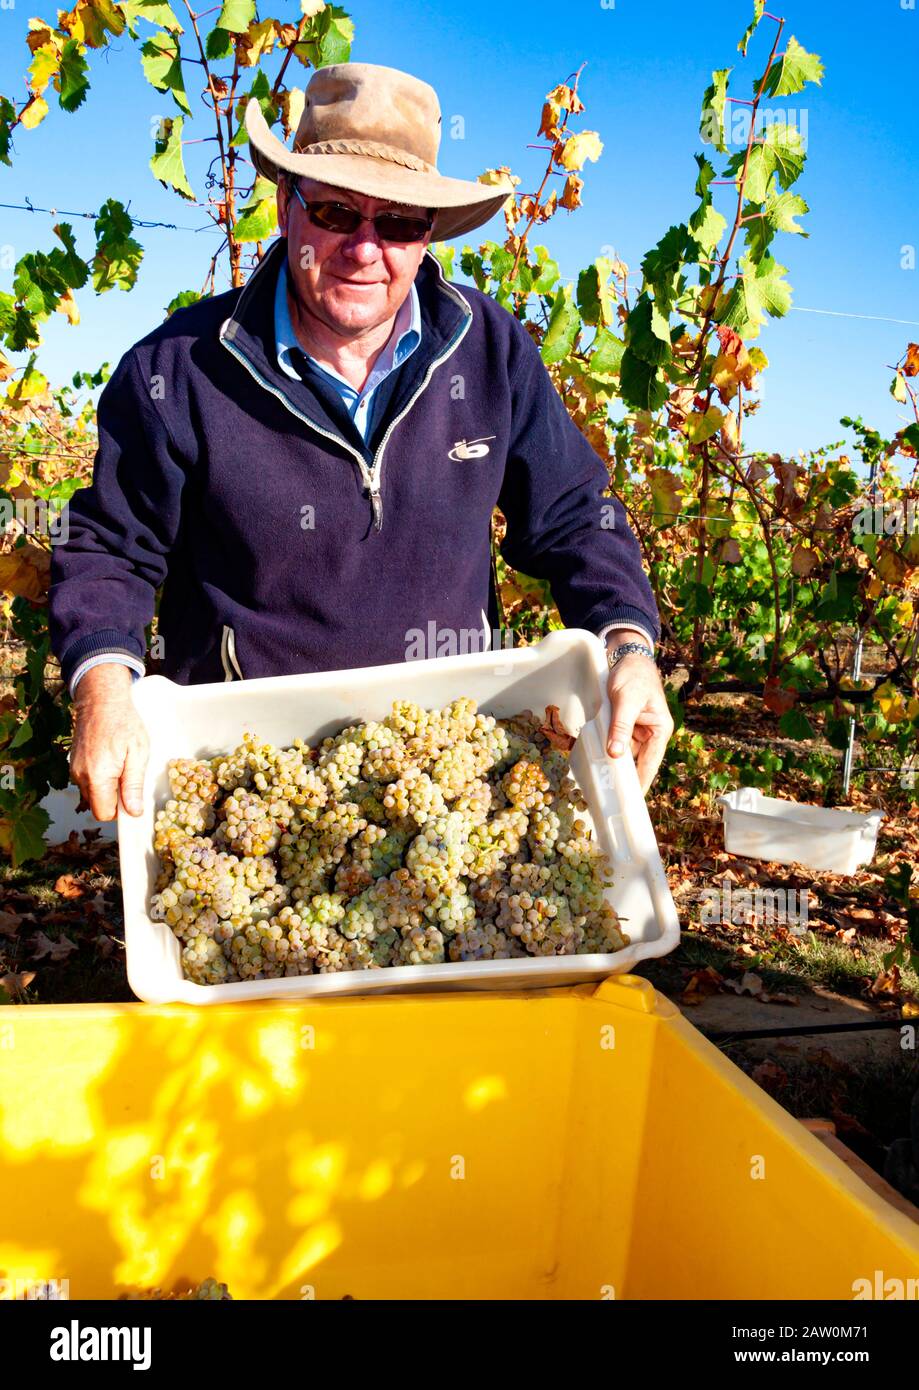 Australian wine makers and breweries Production in South/Western Australia and New South Wales wine regions.Graham Shaw loads grapes into bin Stock Photo